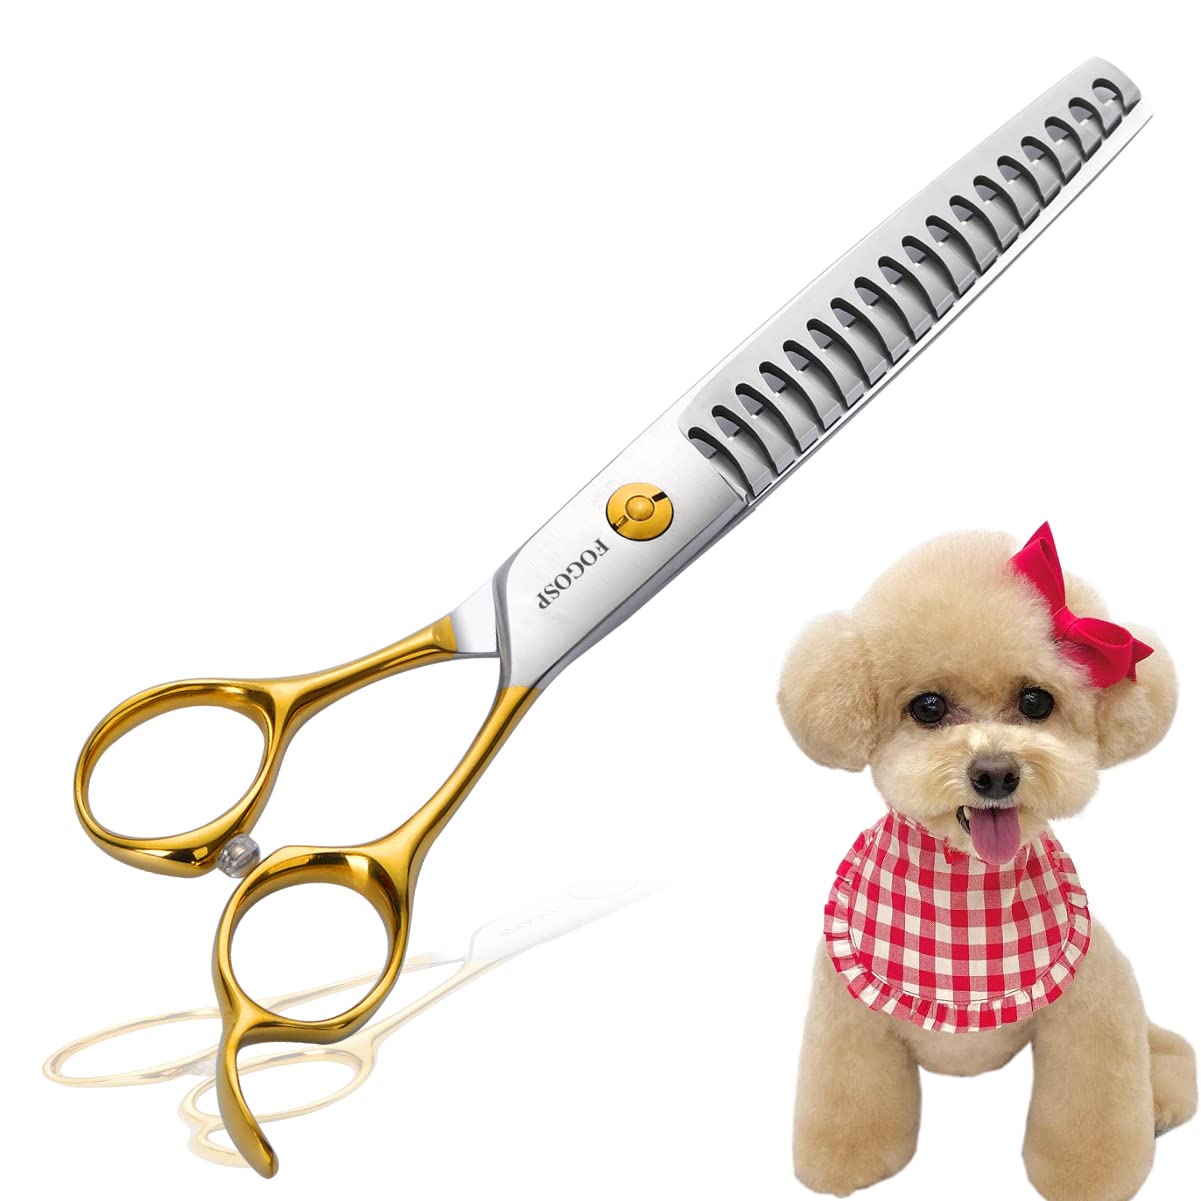 FOgOSP Dog Thinning Shears for grooming 675 chunker Shears Quickly Thinning Thick Hair Professional Dog grooming Scissors for Sm